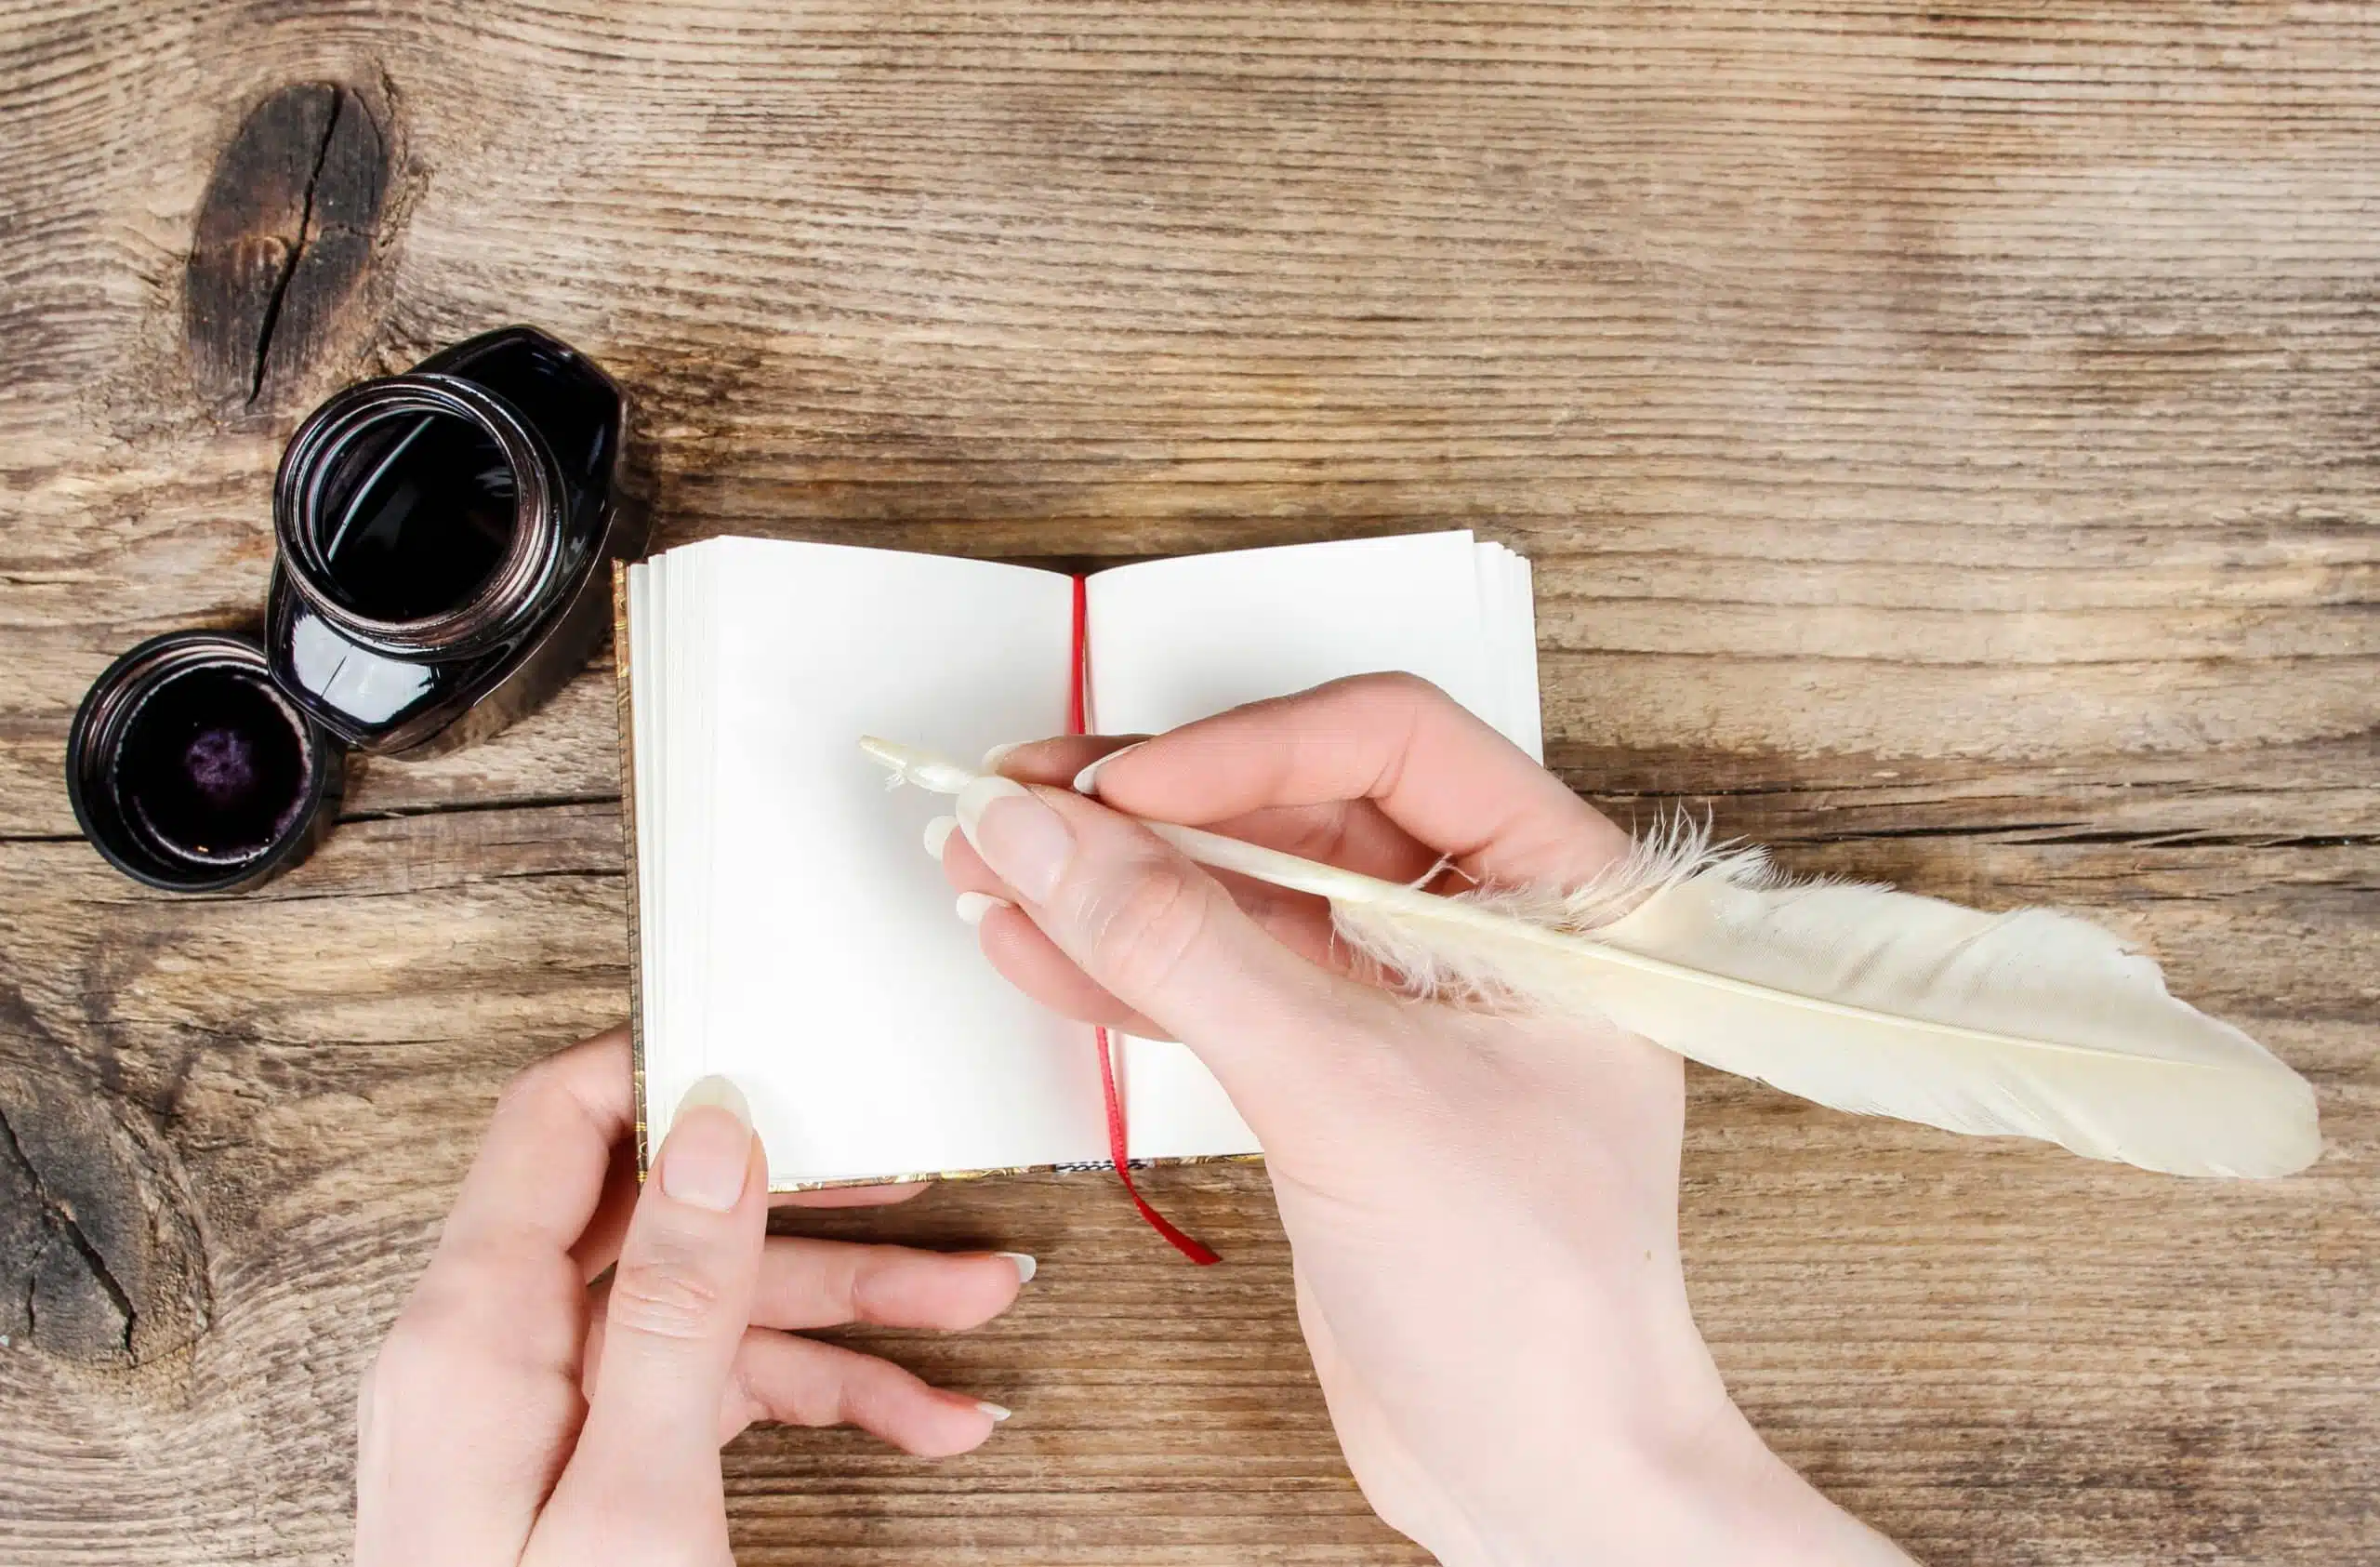 Woman writing on notebook with white quill pen.